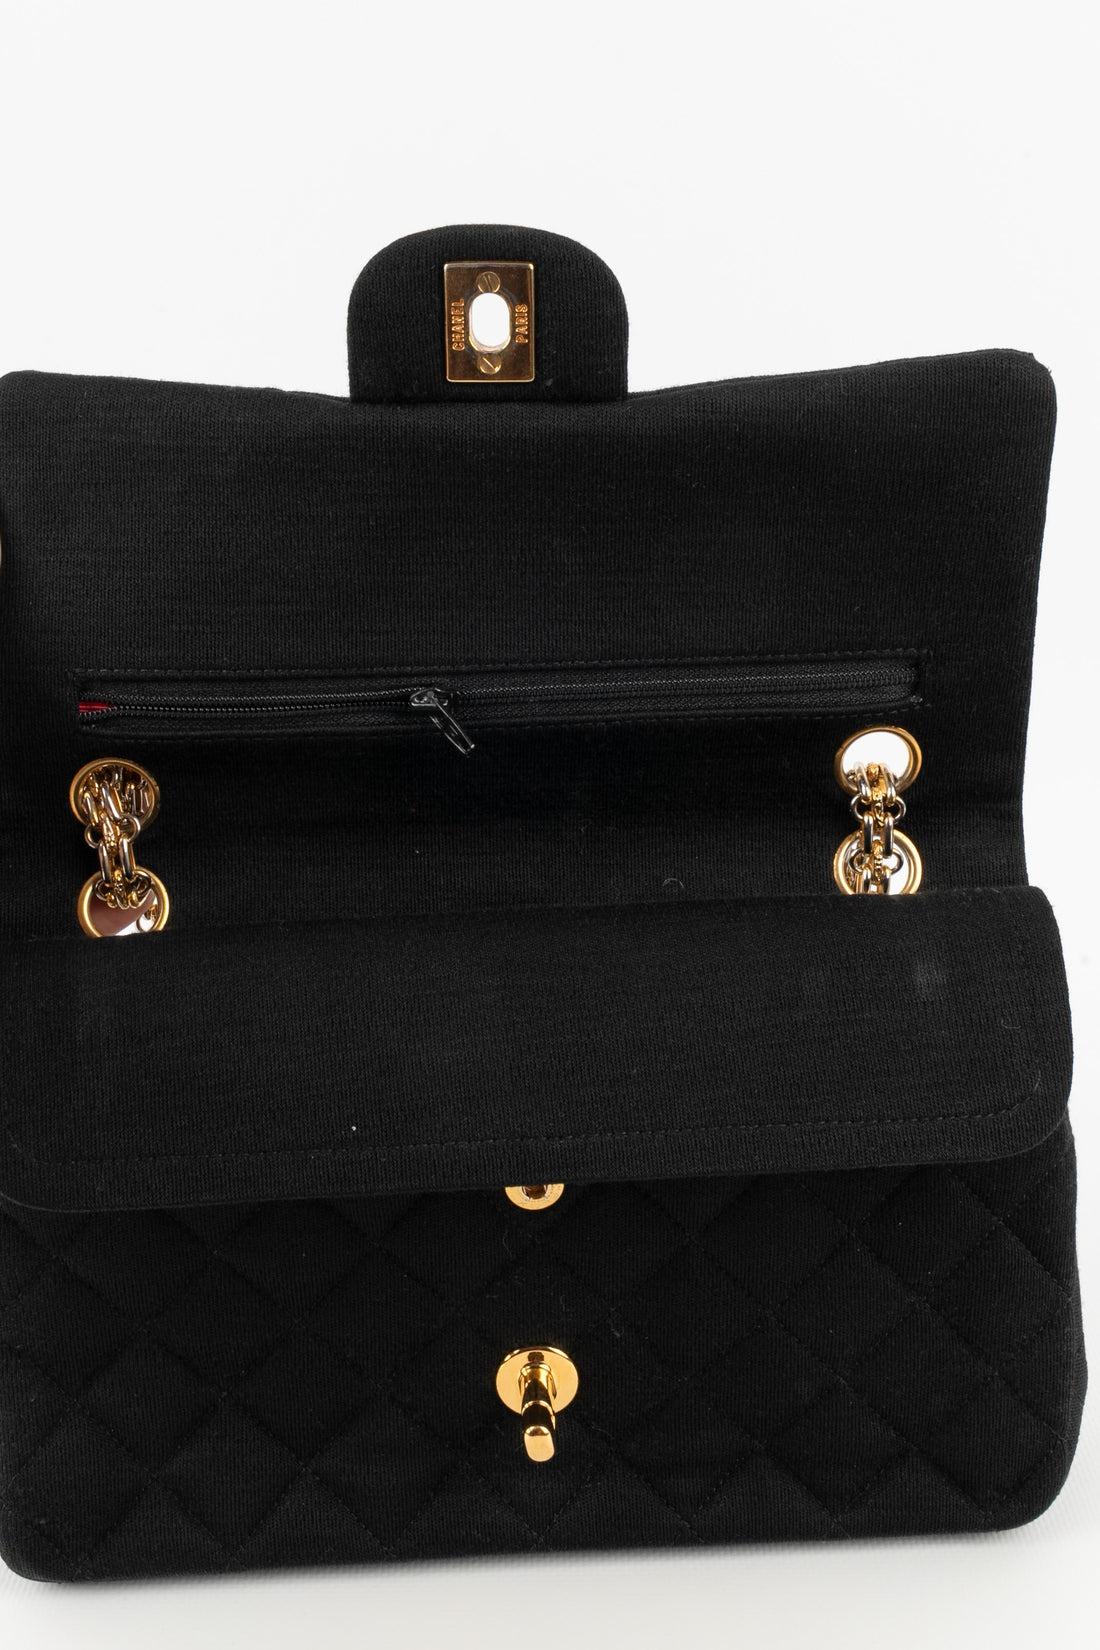 Chanel Quilted Black Fabric Timeless Bag, 1991/1994 For Sale 6